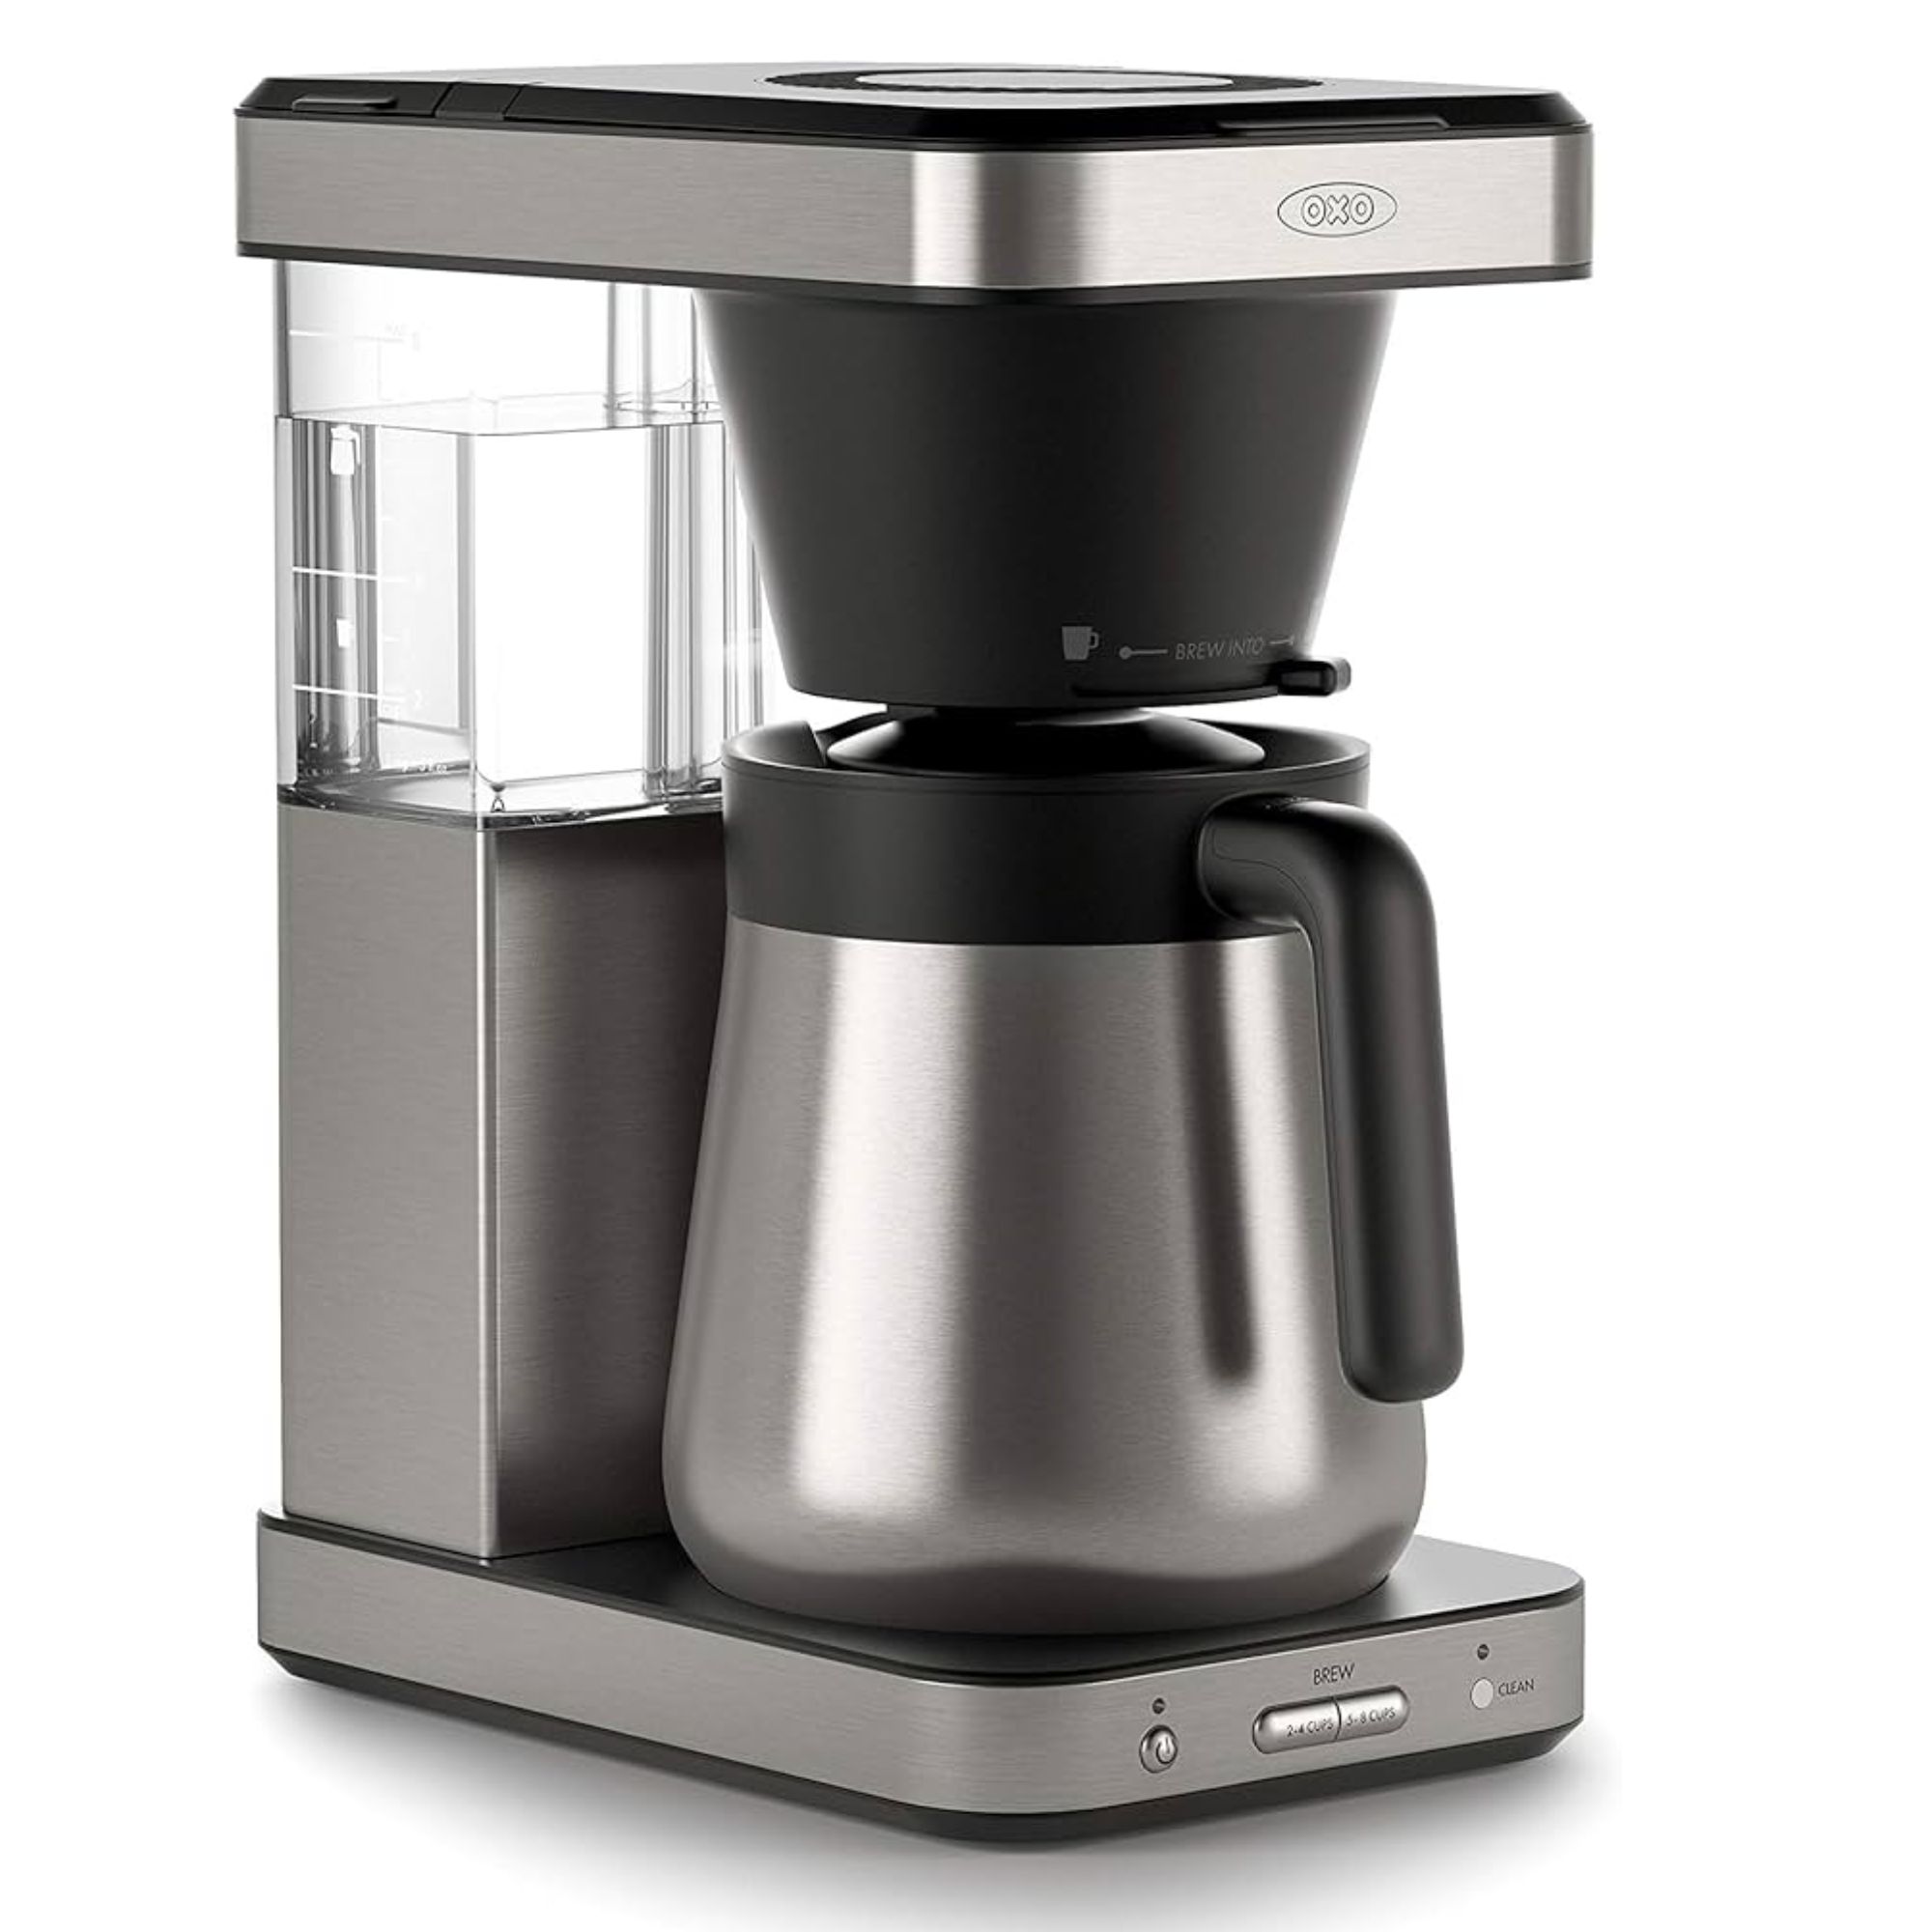 OXO brew 8 cup coffee maker in silver